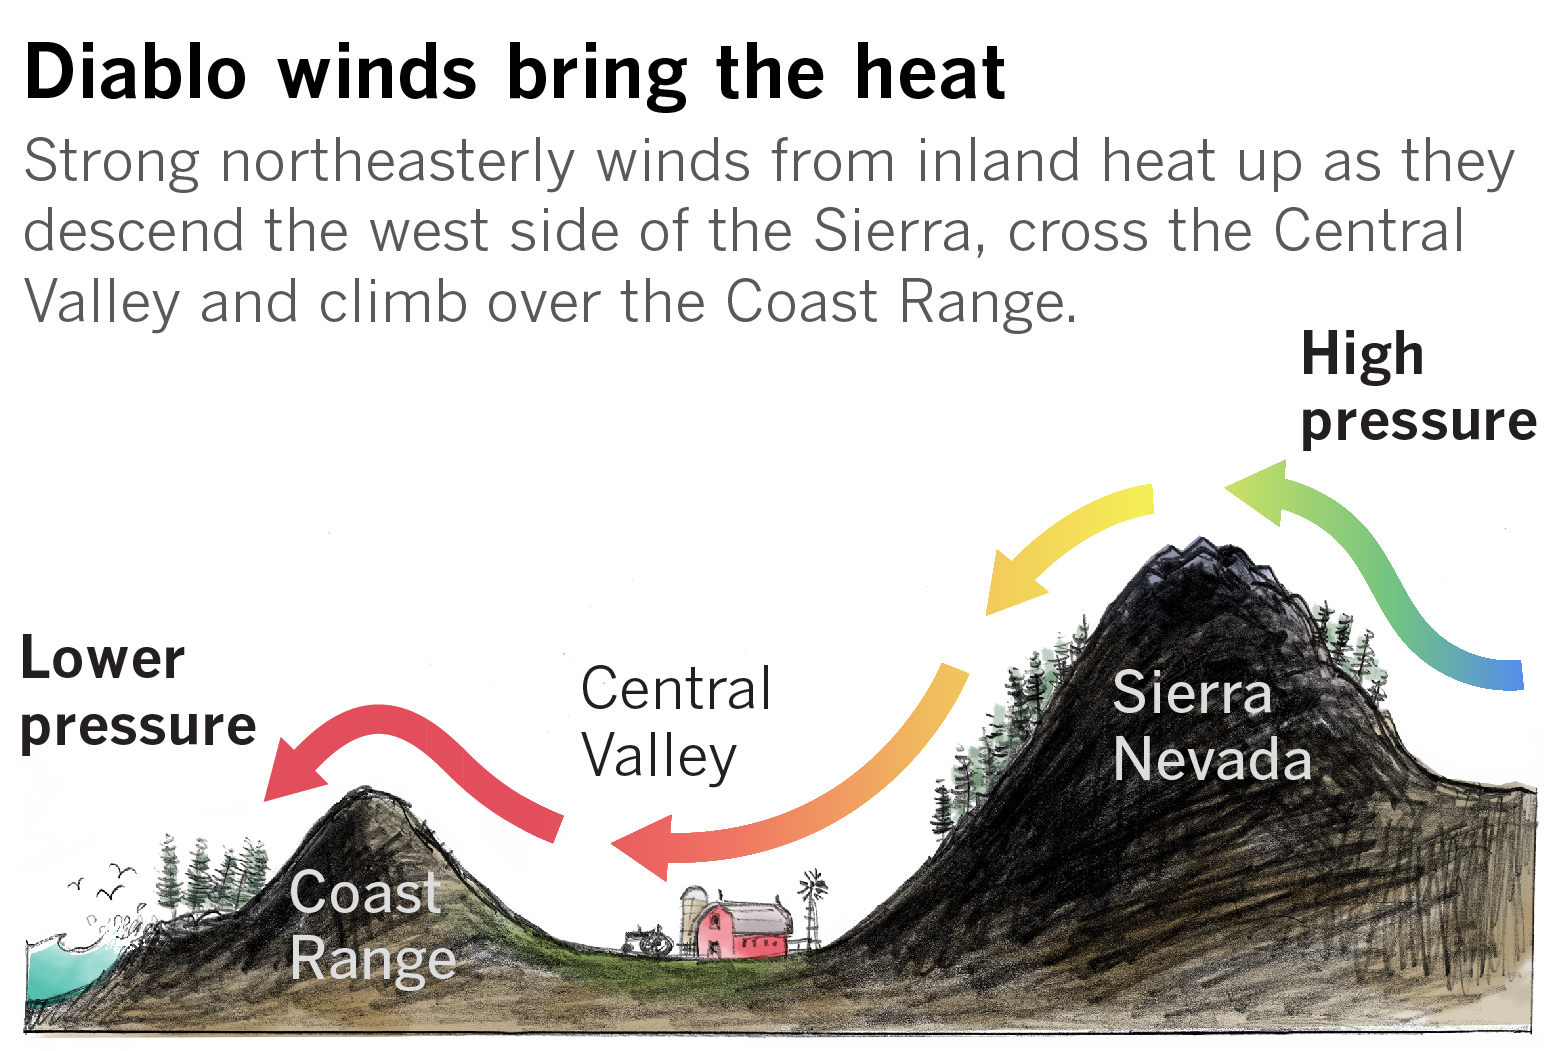 What are Diablo winds?